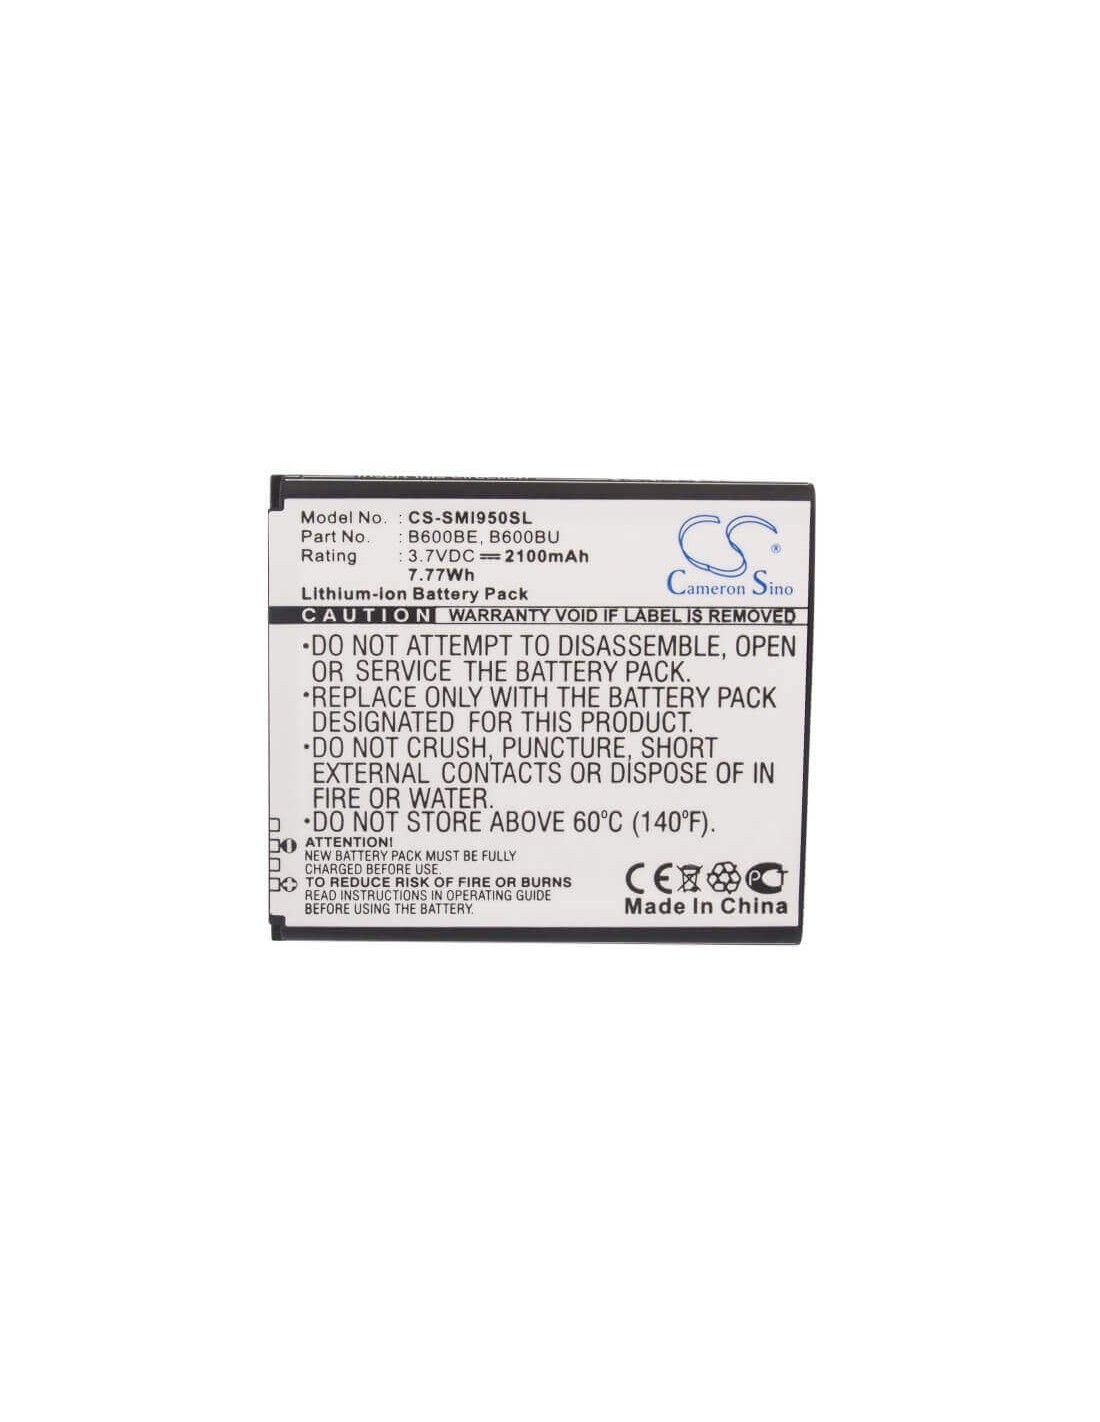 Battery for Samsung Galaxy S4, Galaxy S4 LTE, GT-I9500 3.7V, 2100mAh - 7.77Wh